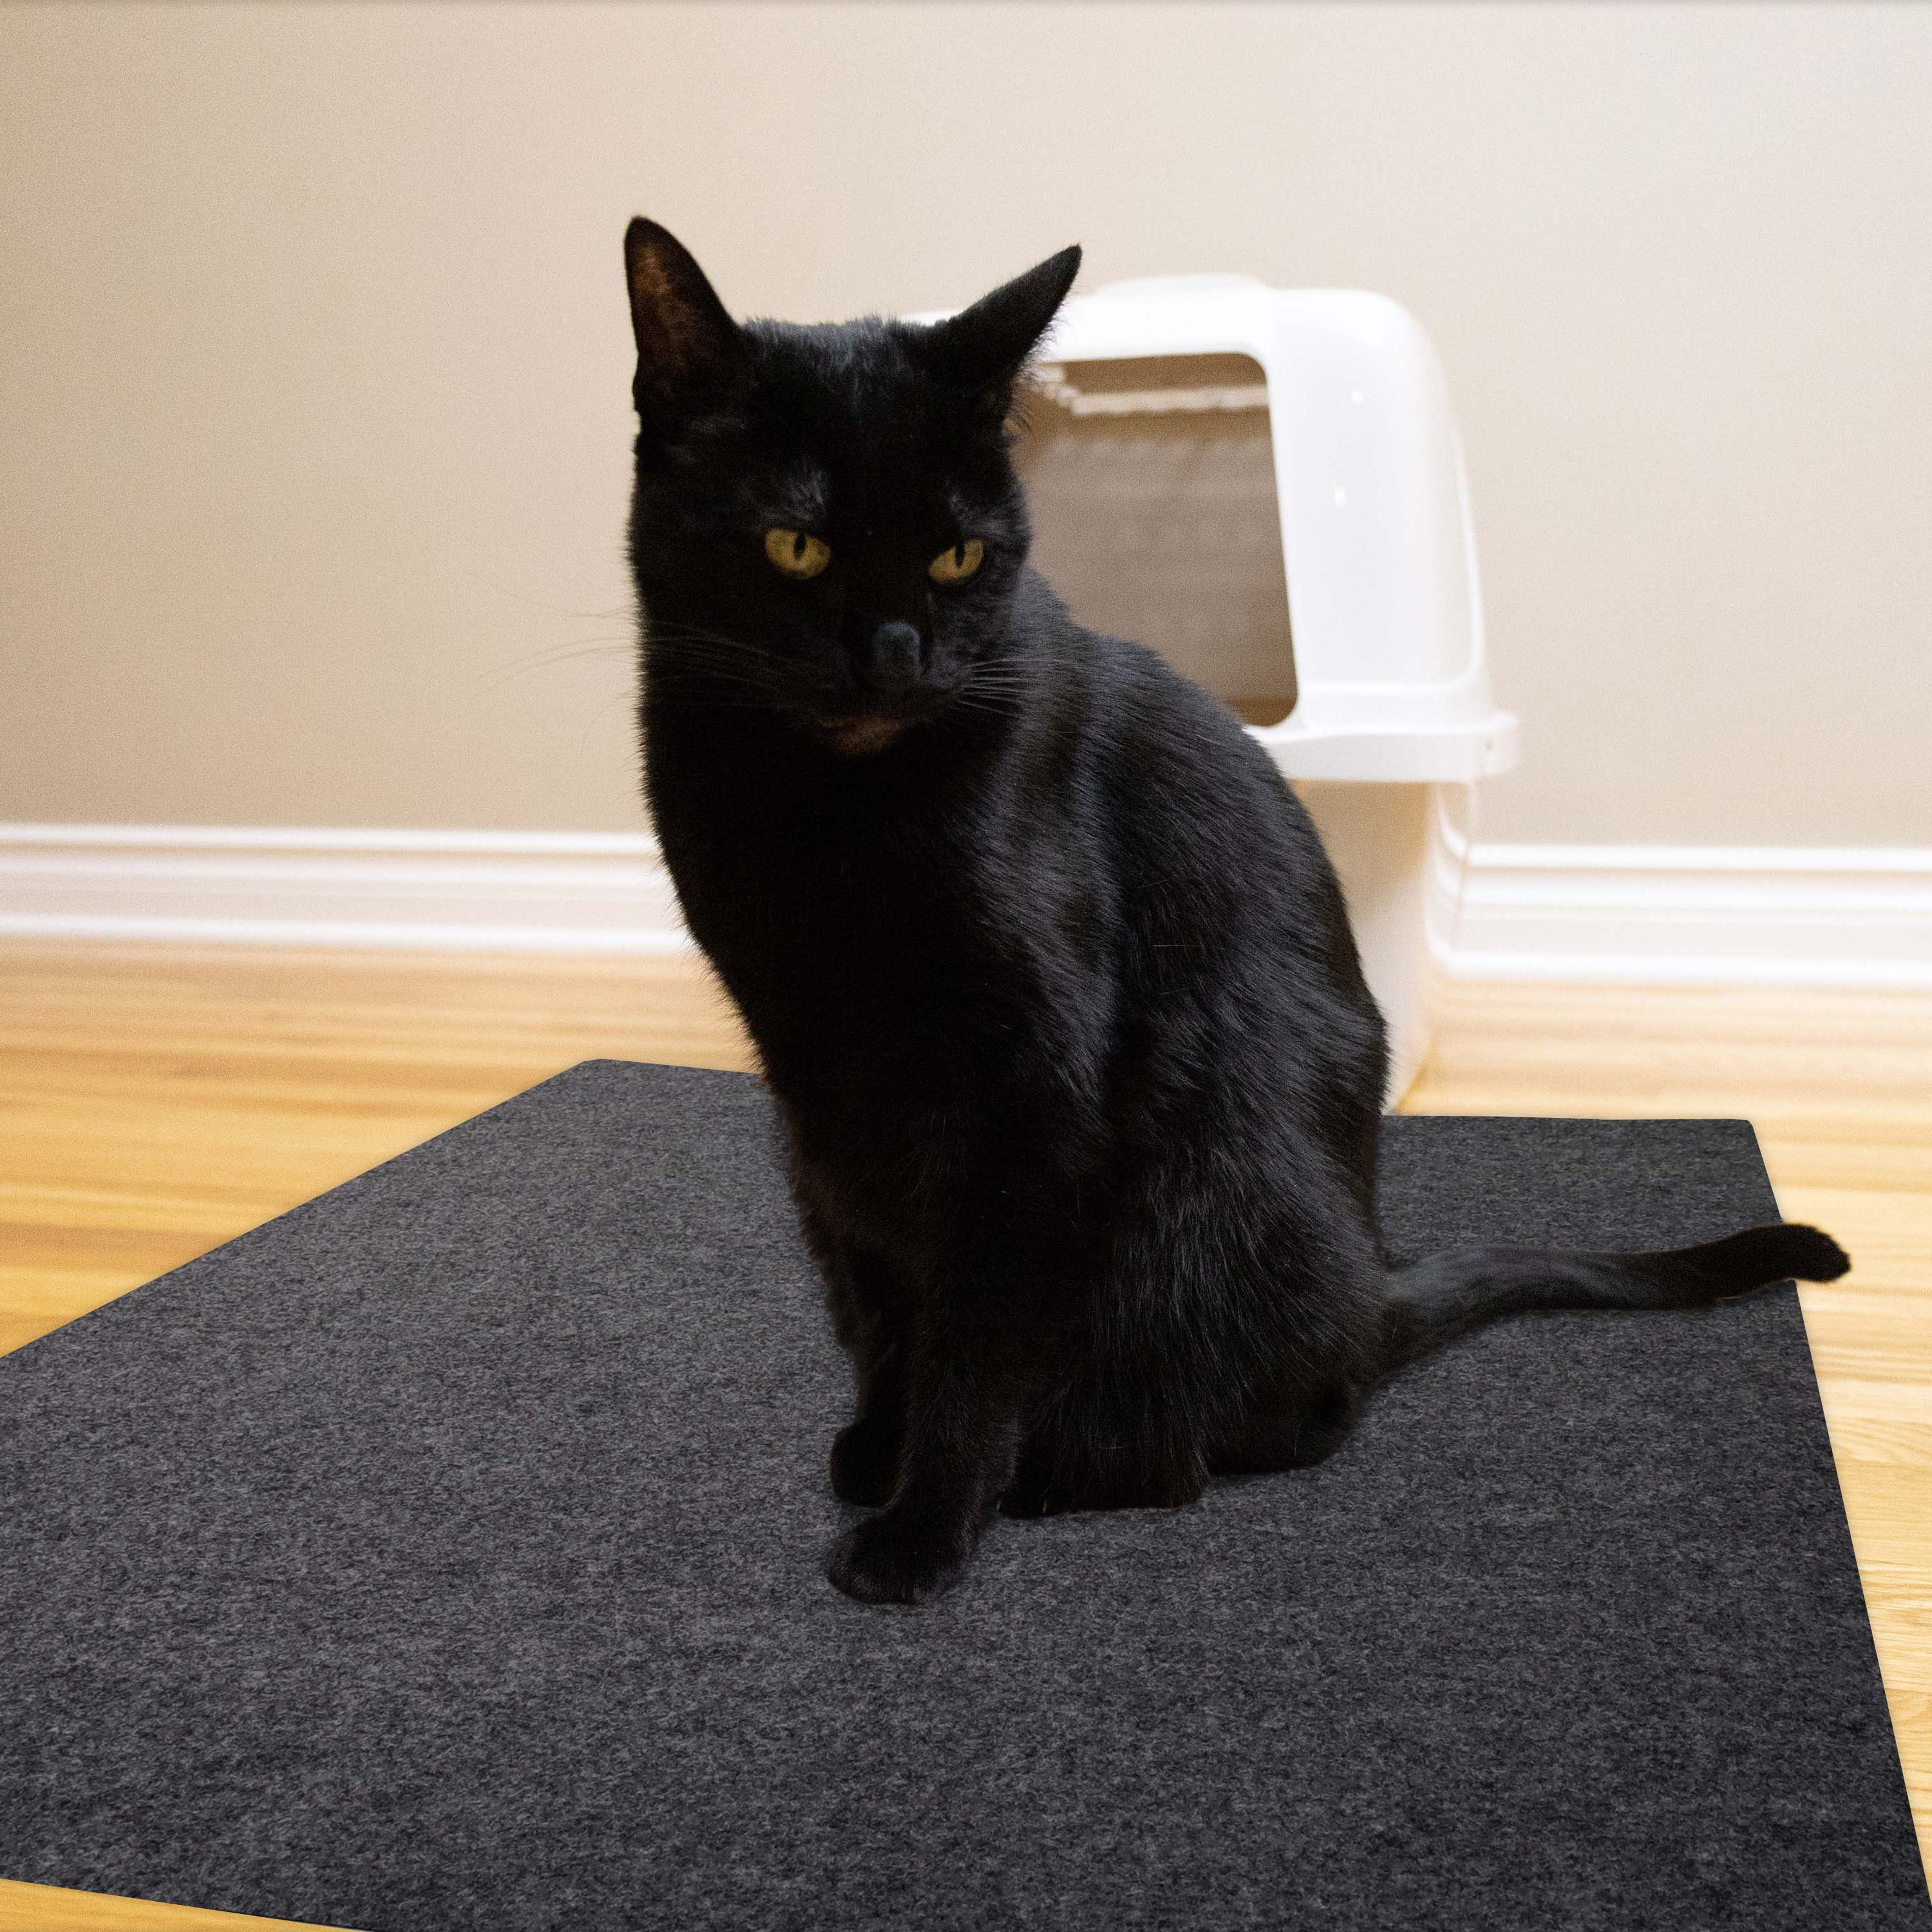 Get this XL Litter Mat on our site today! 😻✨